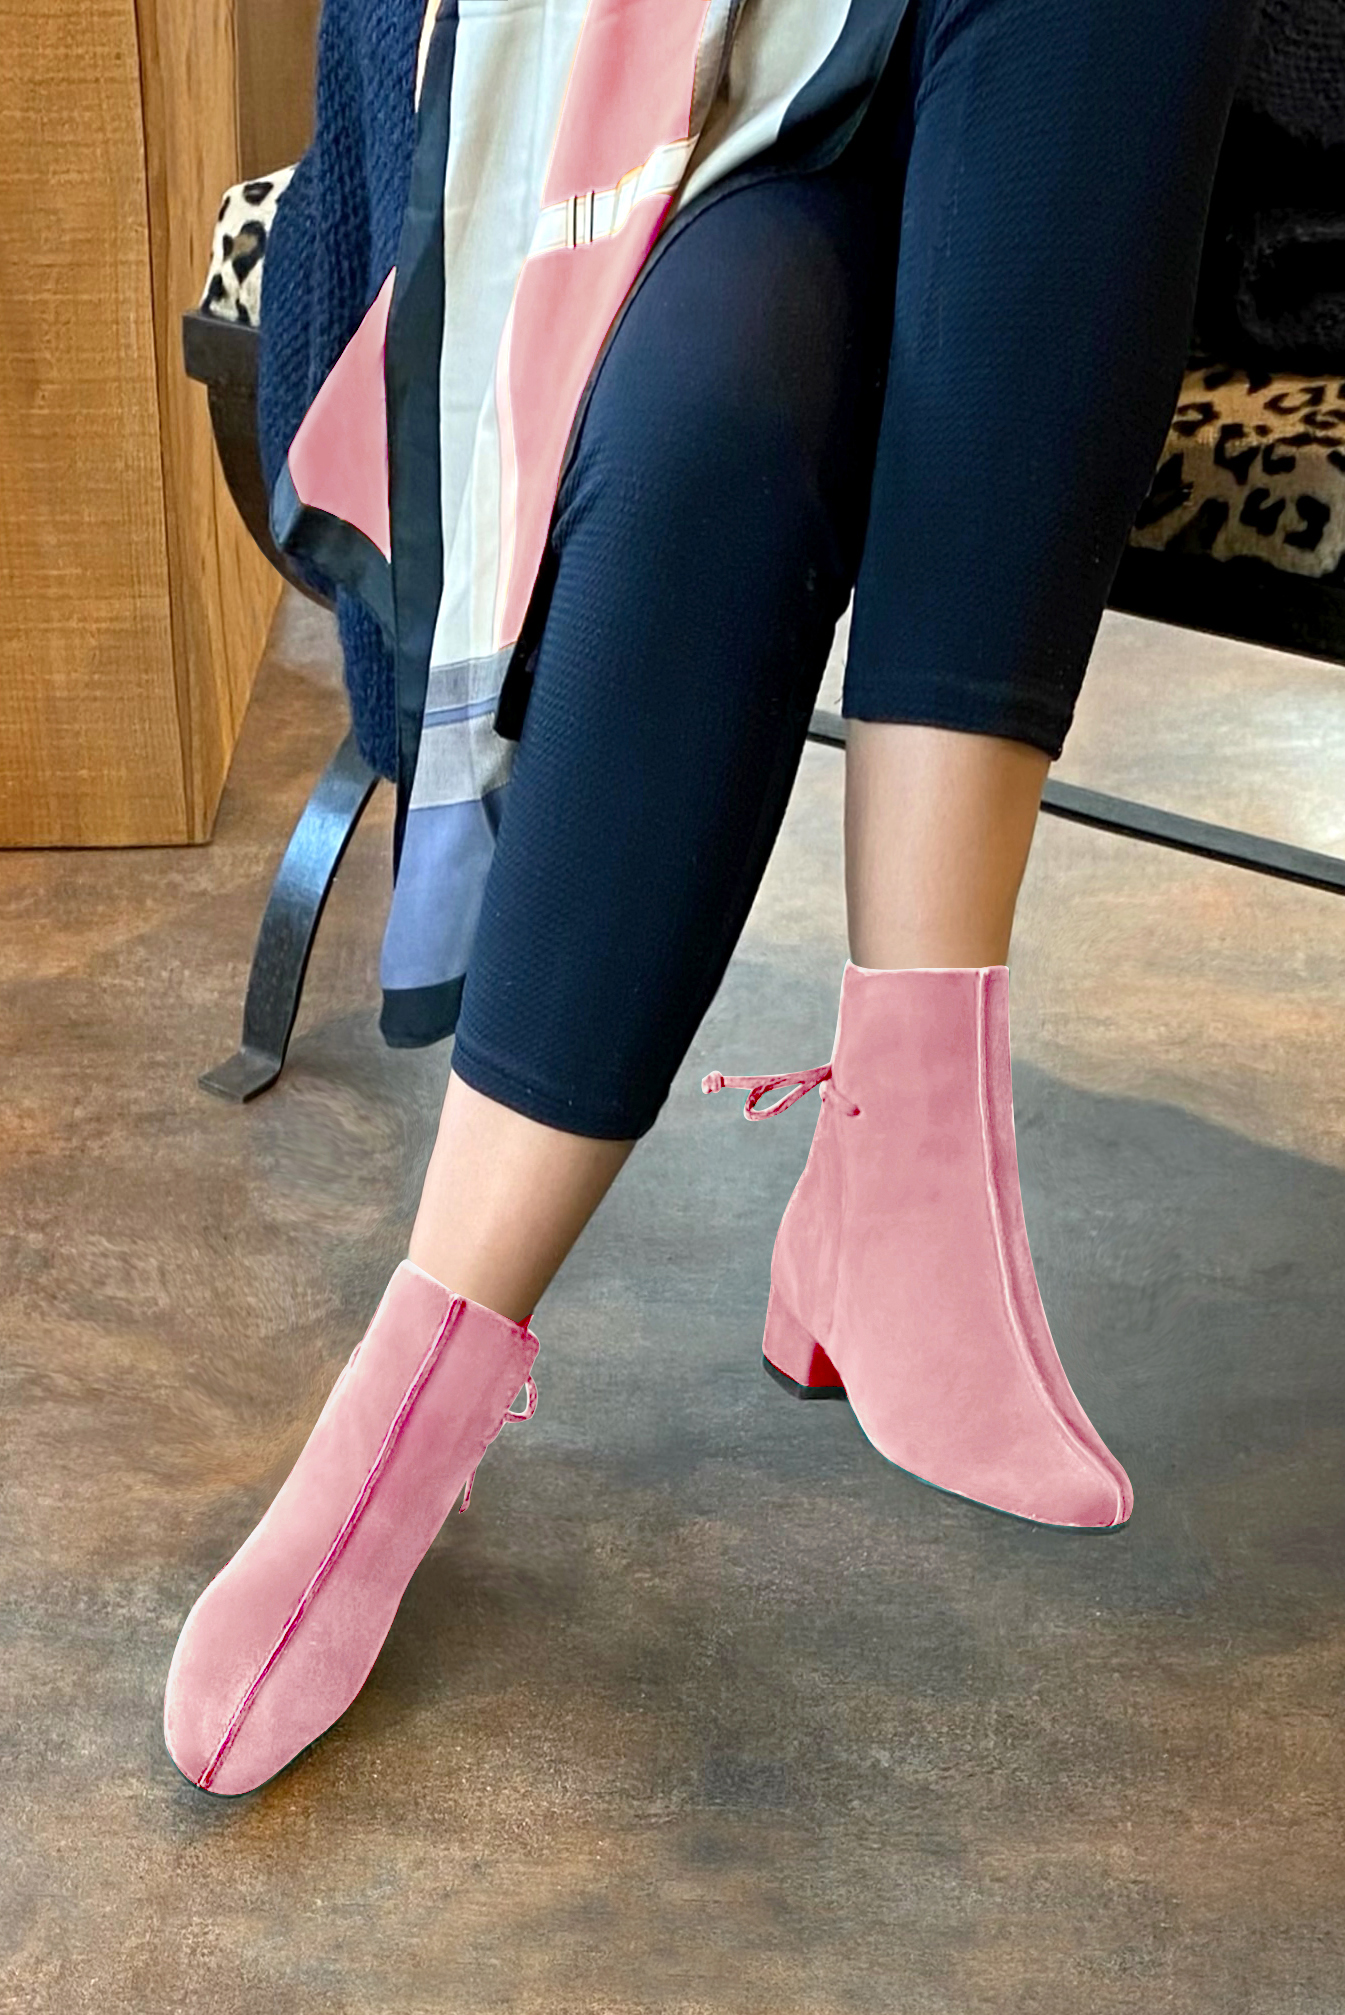 Carnation pink women's ankle boots with laces at the back. Round toe. Low block heels. Worn view - Florence KOOIJMAN